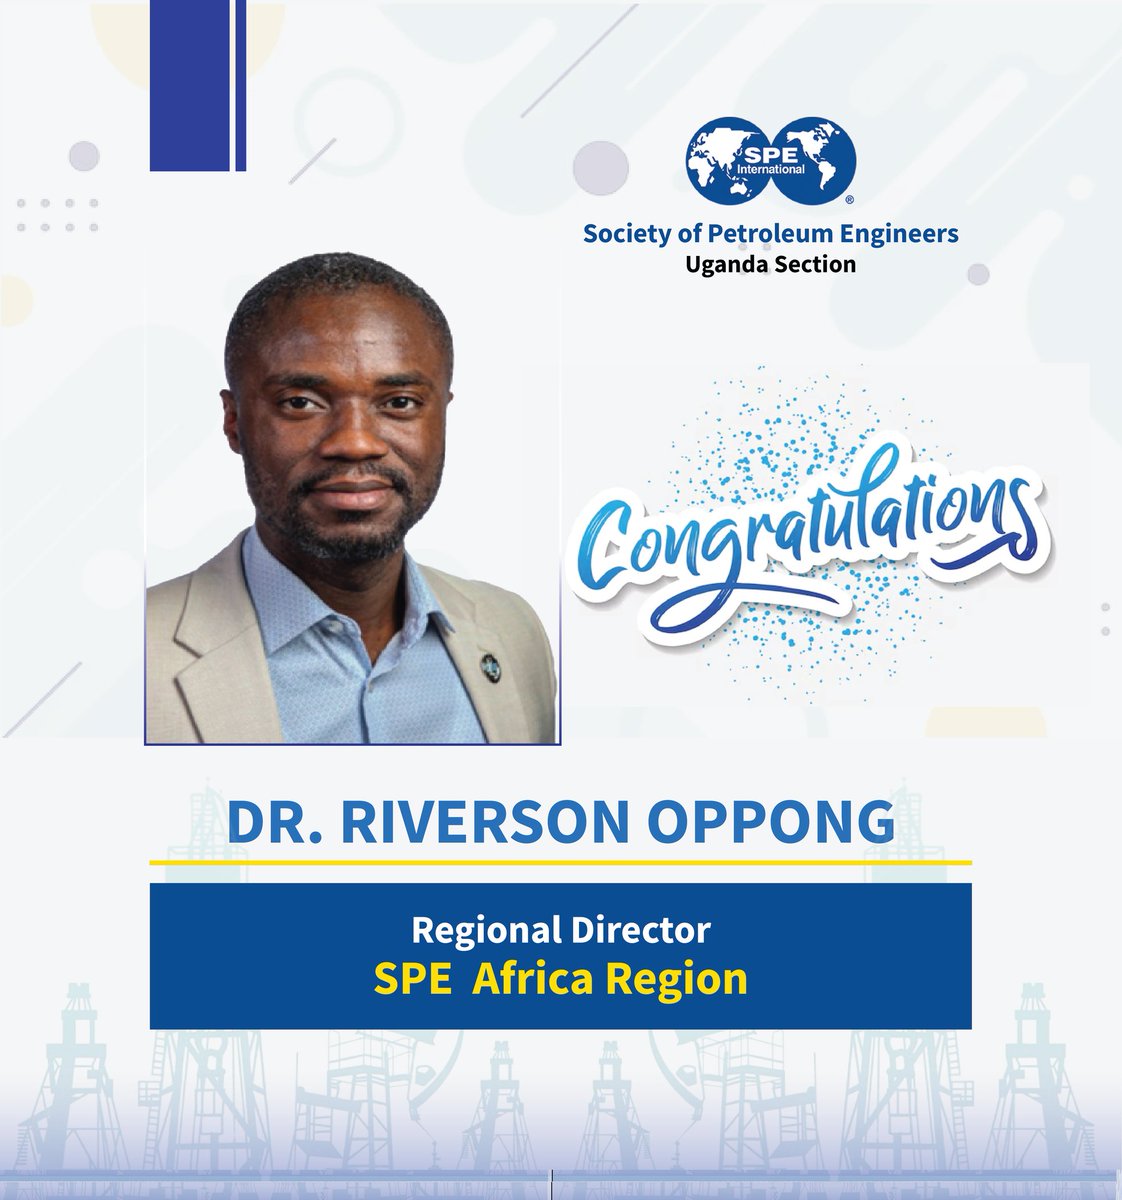 Congratulations Dr. Riverson Oppong on your appointment as the SPE Africa Regional Director! 🌍👏 We at SPE Uganda Section are thrilled to celebrate your achievement and look forward to your inspiring leadership. Here's to a bright future ahead! 🌟 #WeAreSPE